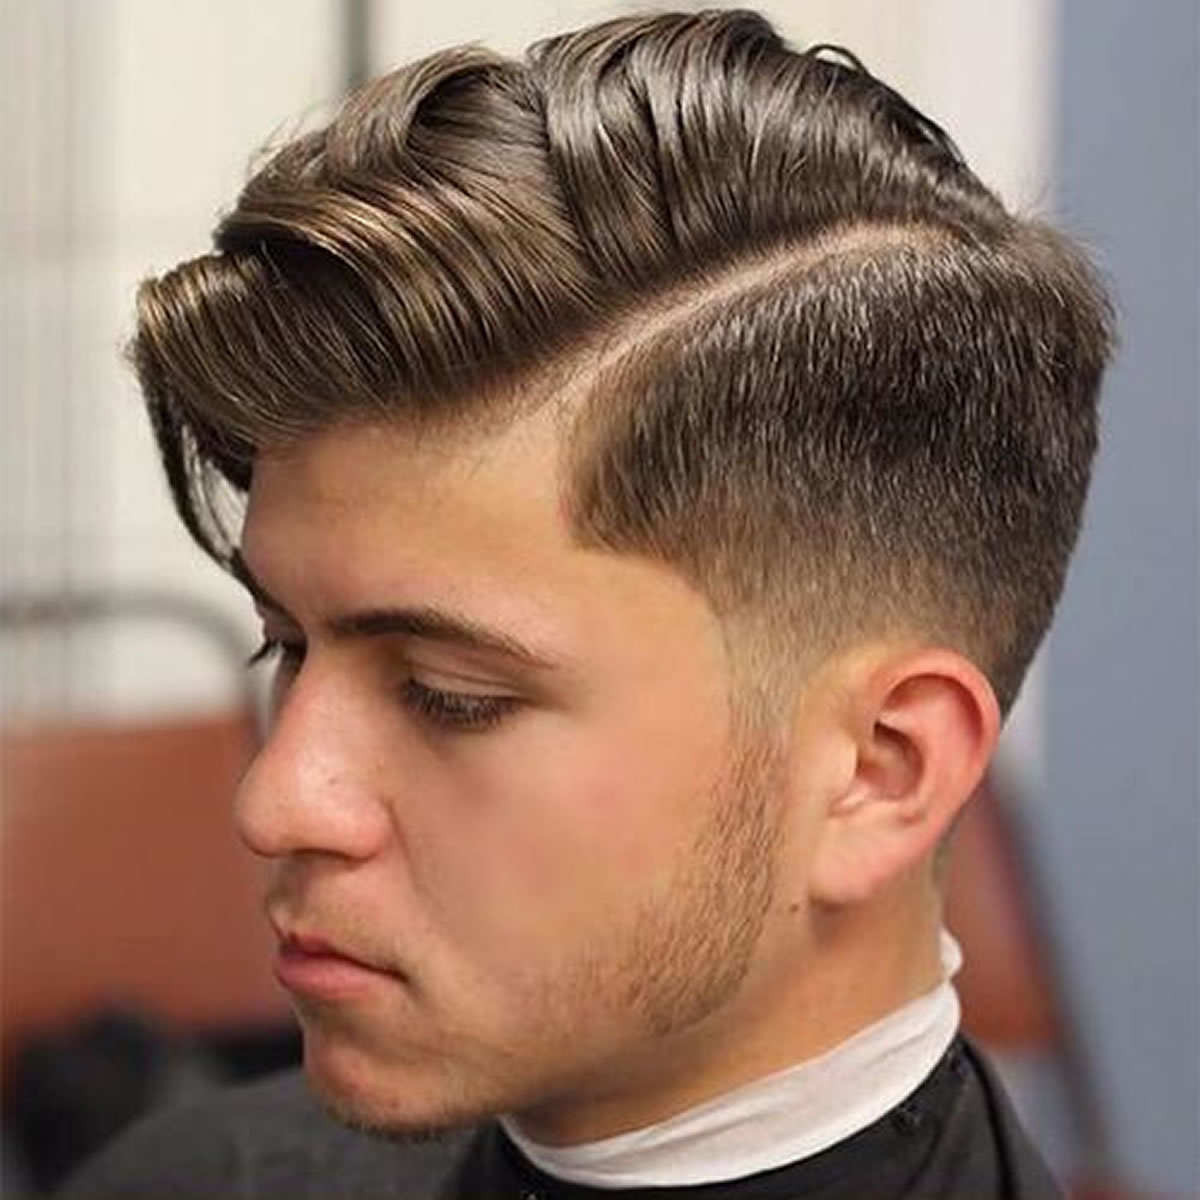 Best ideas about Hairstyle For Boys
. Save or Pin The 2018 hairstyles for men Short and Cuts Hairstyles Now.